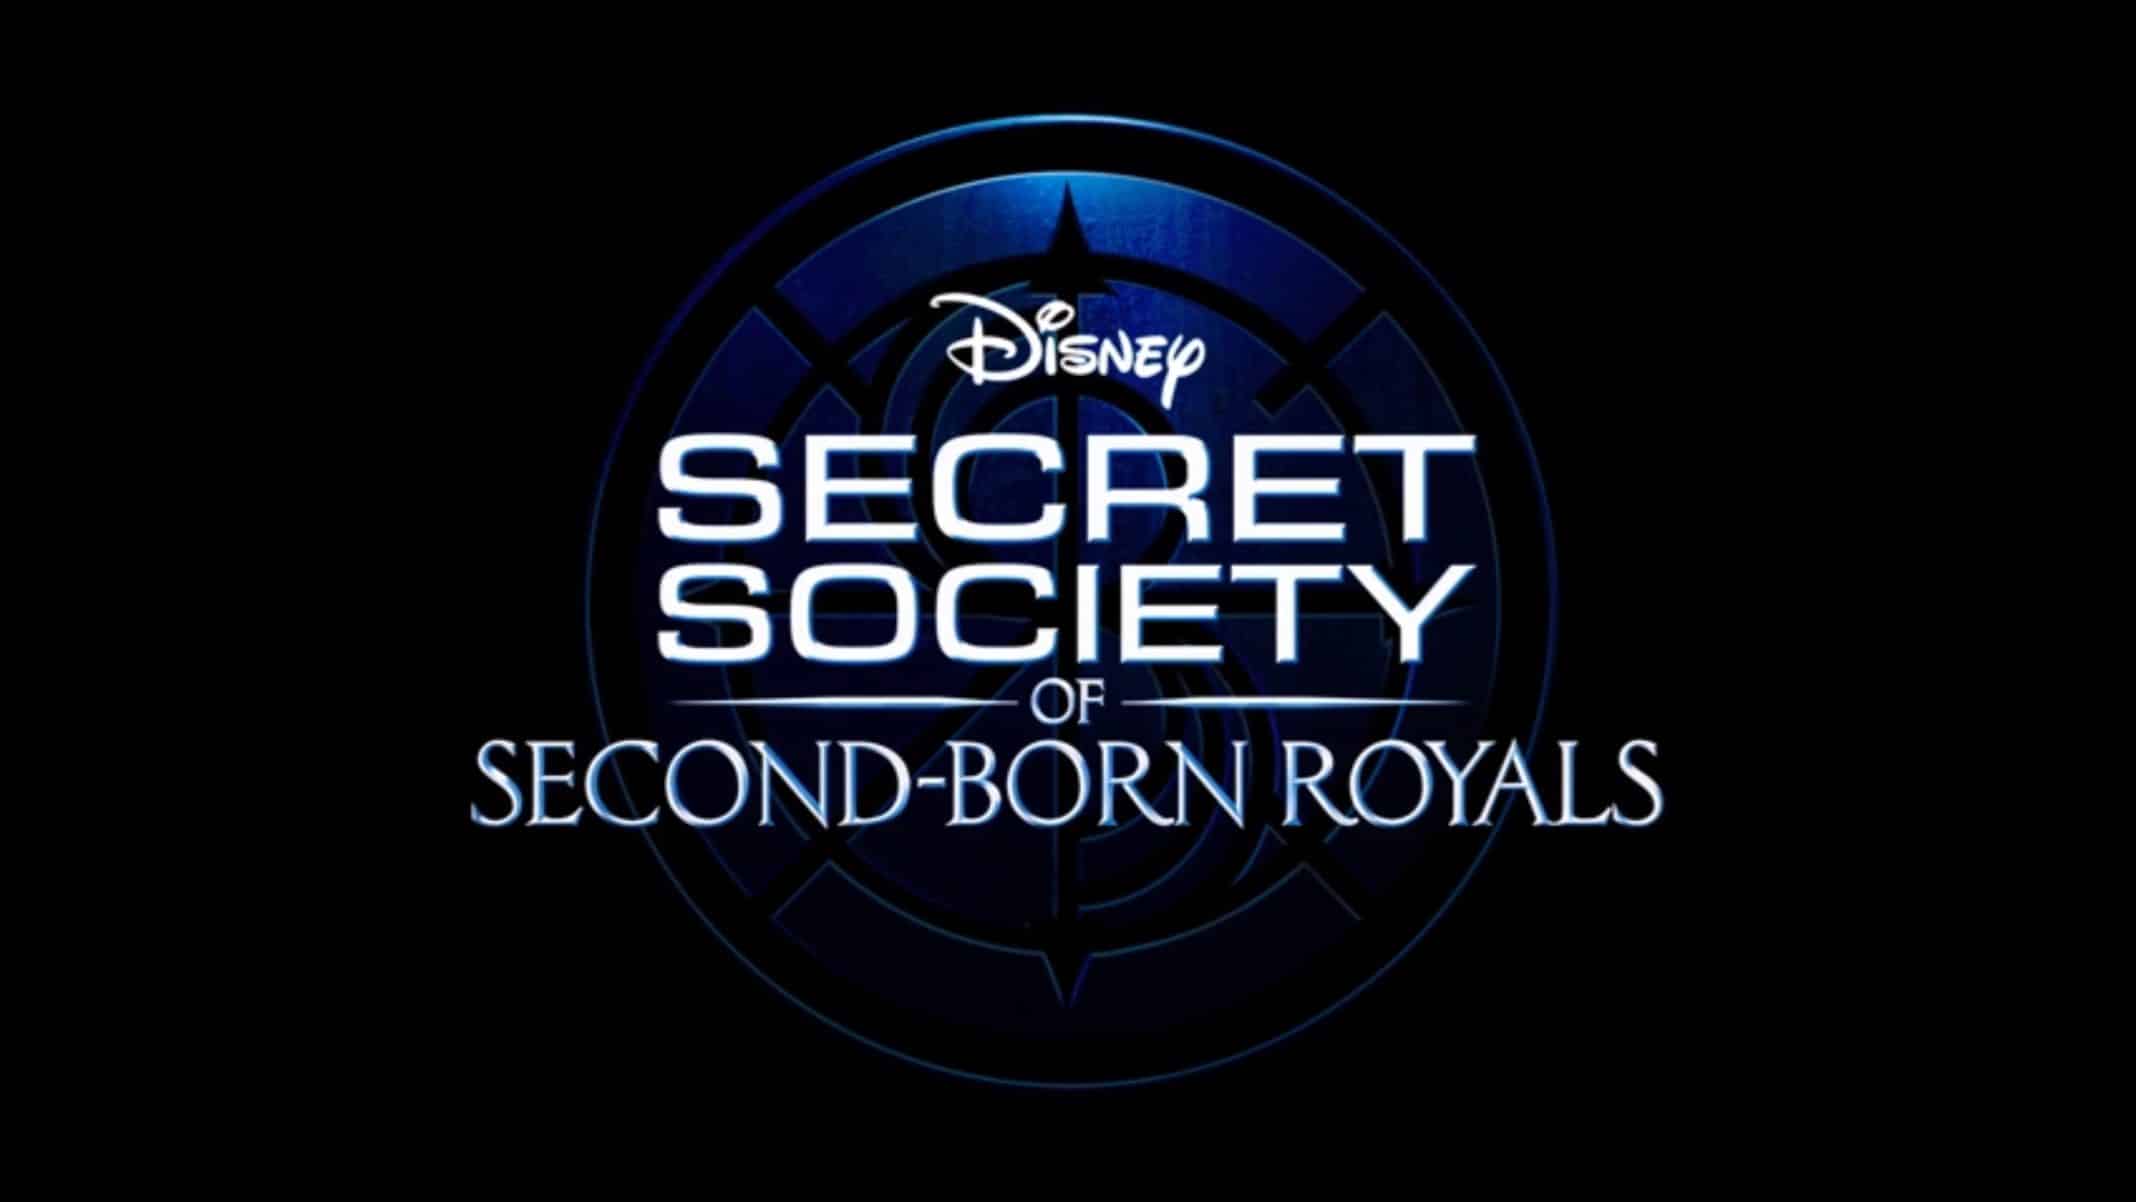 Secret Society of Second-Born Royals (2020) – Review/ Summary (with Spoilers)